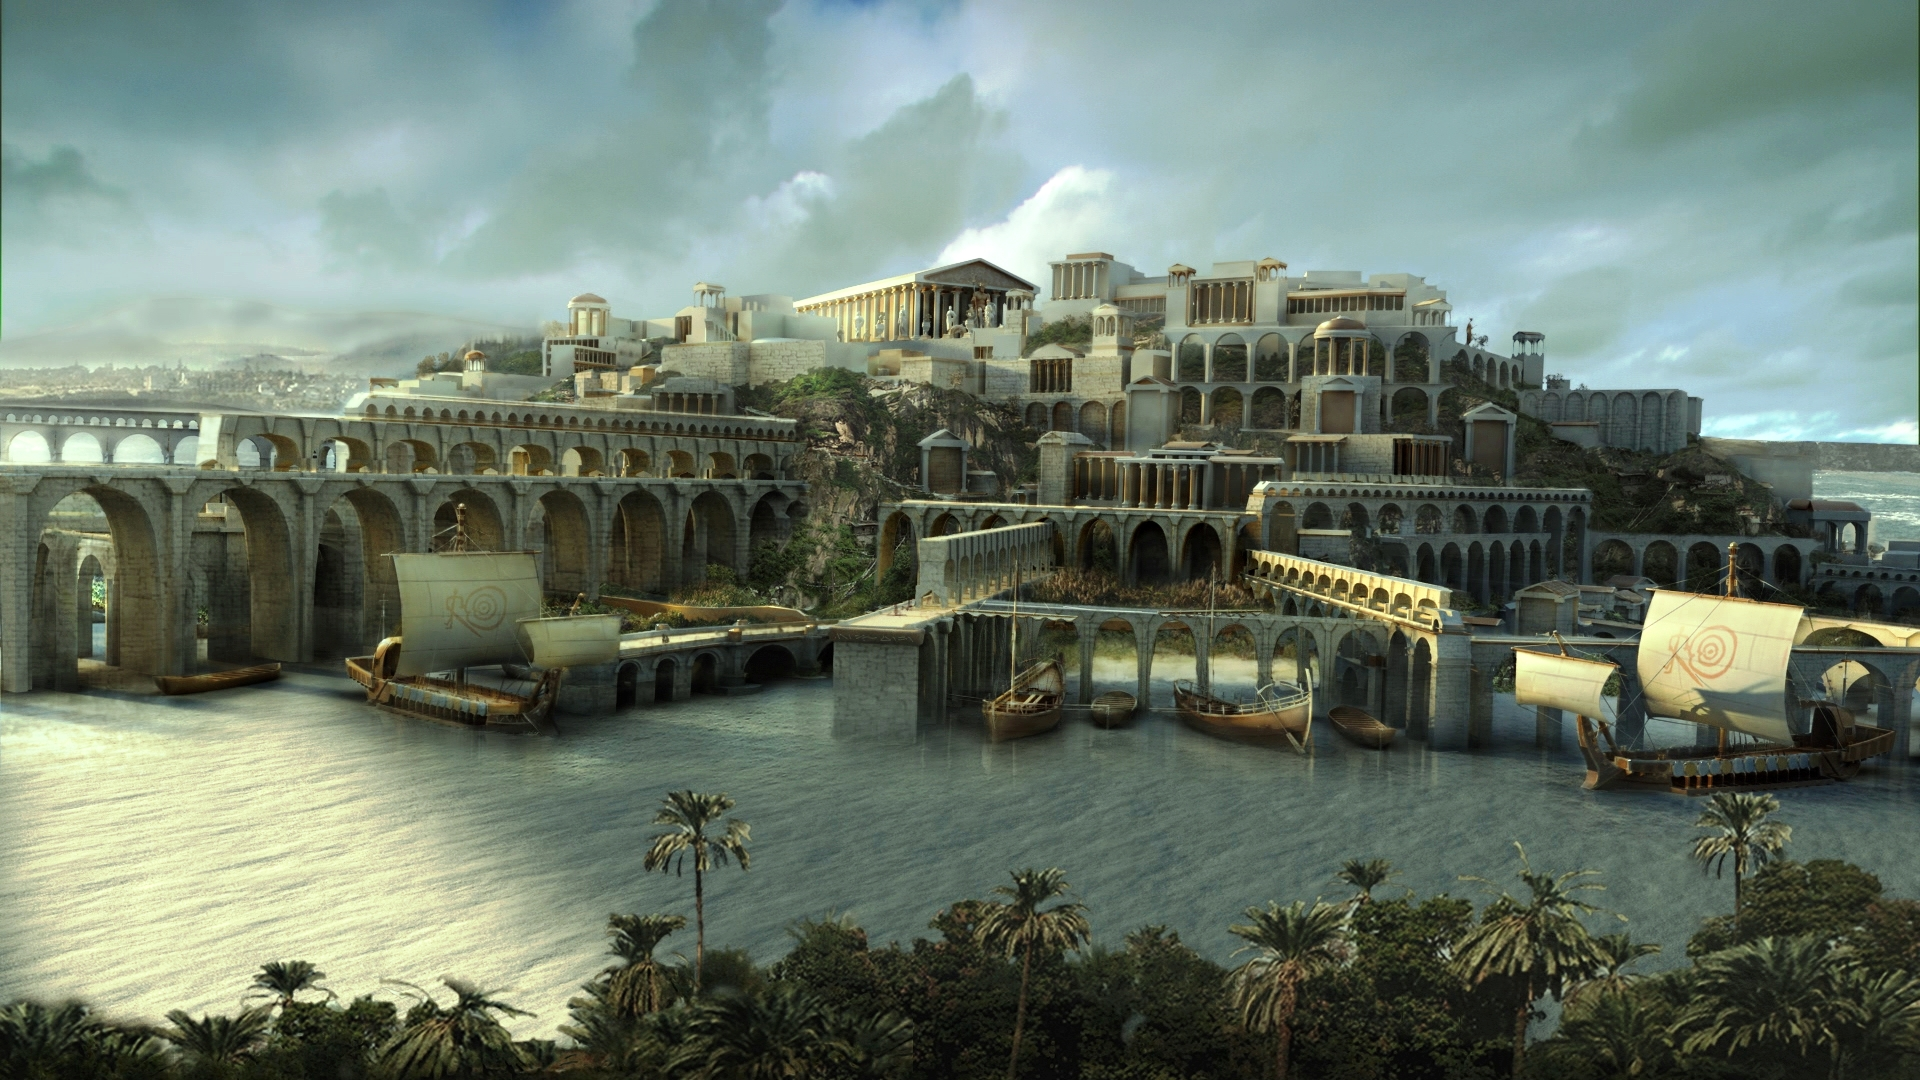 An artist's conception shows the city of Atlantis as it has been envisioned in legend.National Geographic